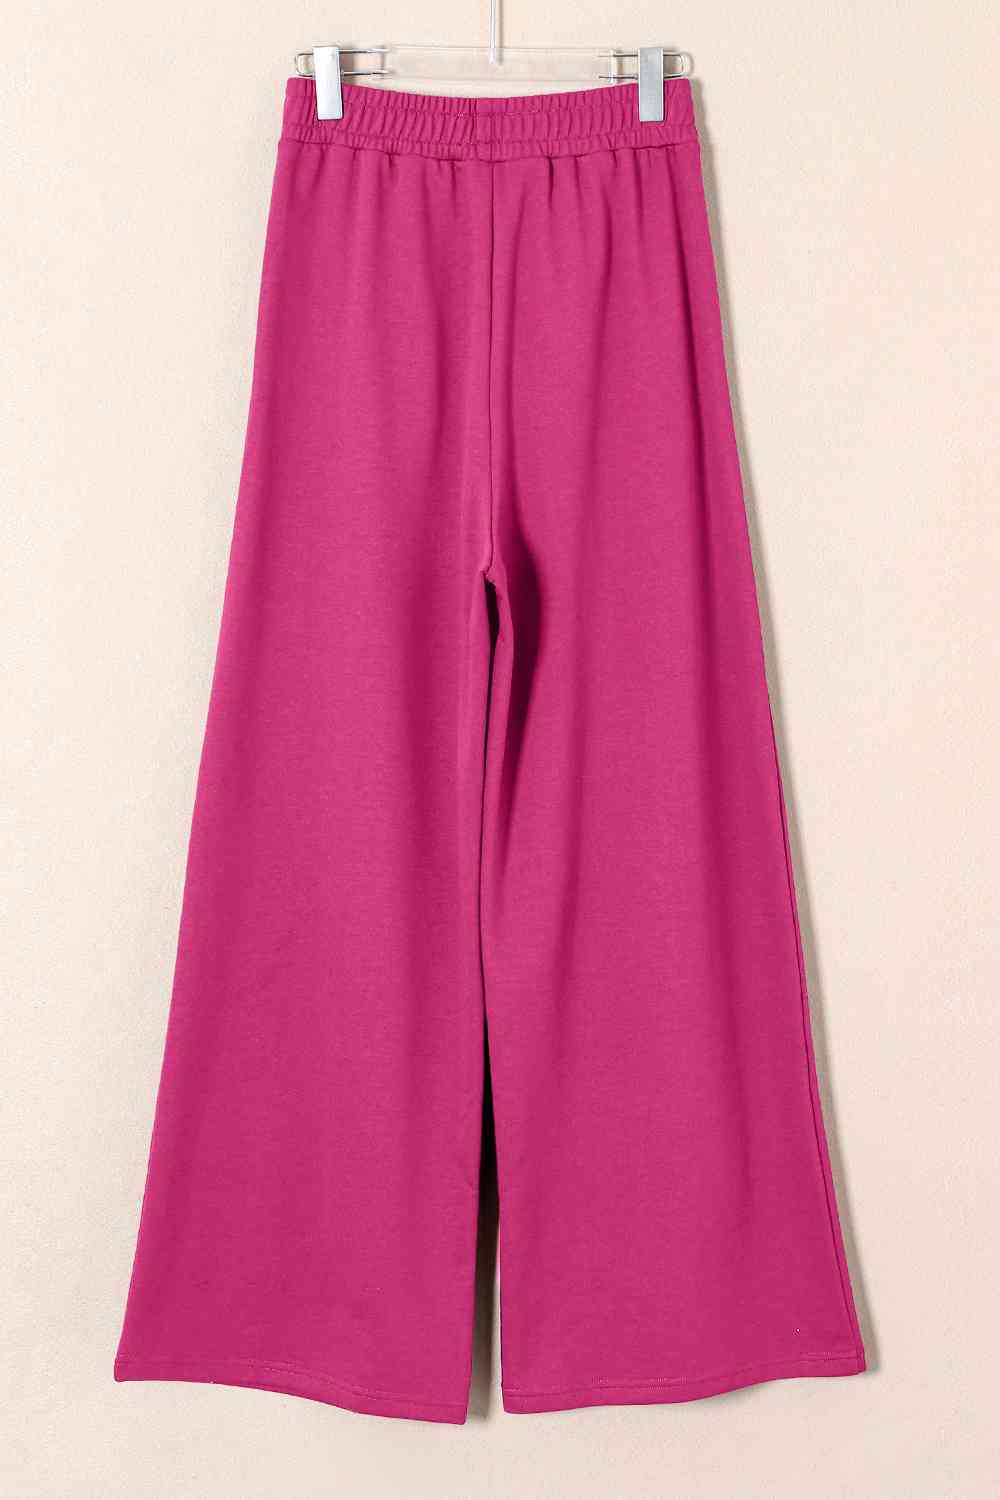 Maroon Lace-Up Wide Leg Pants with Pockets